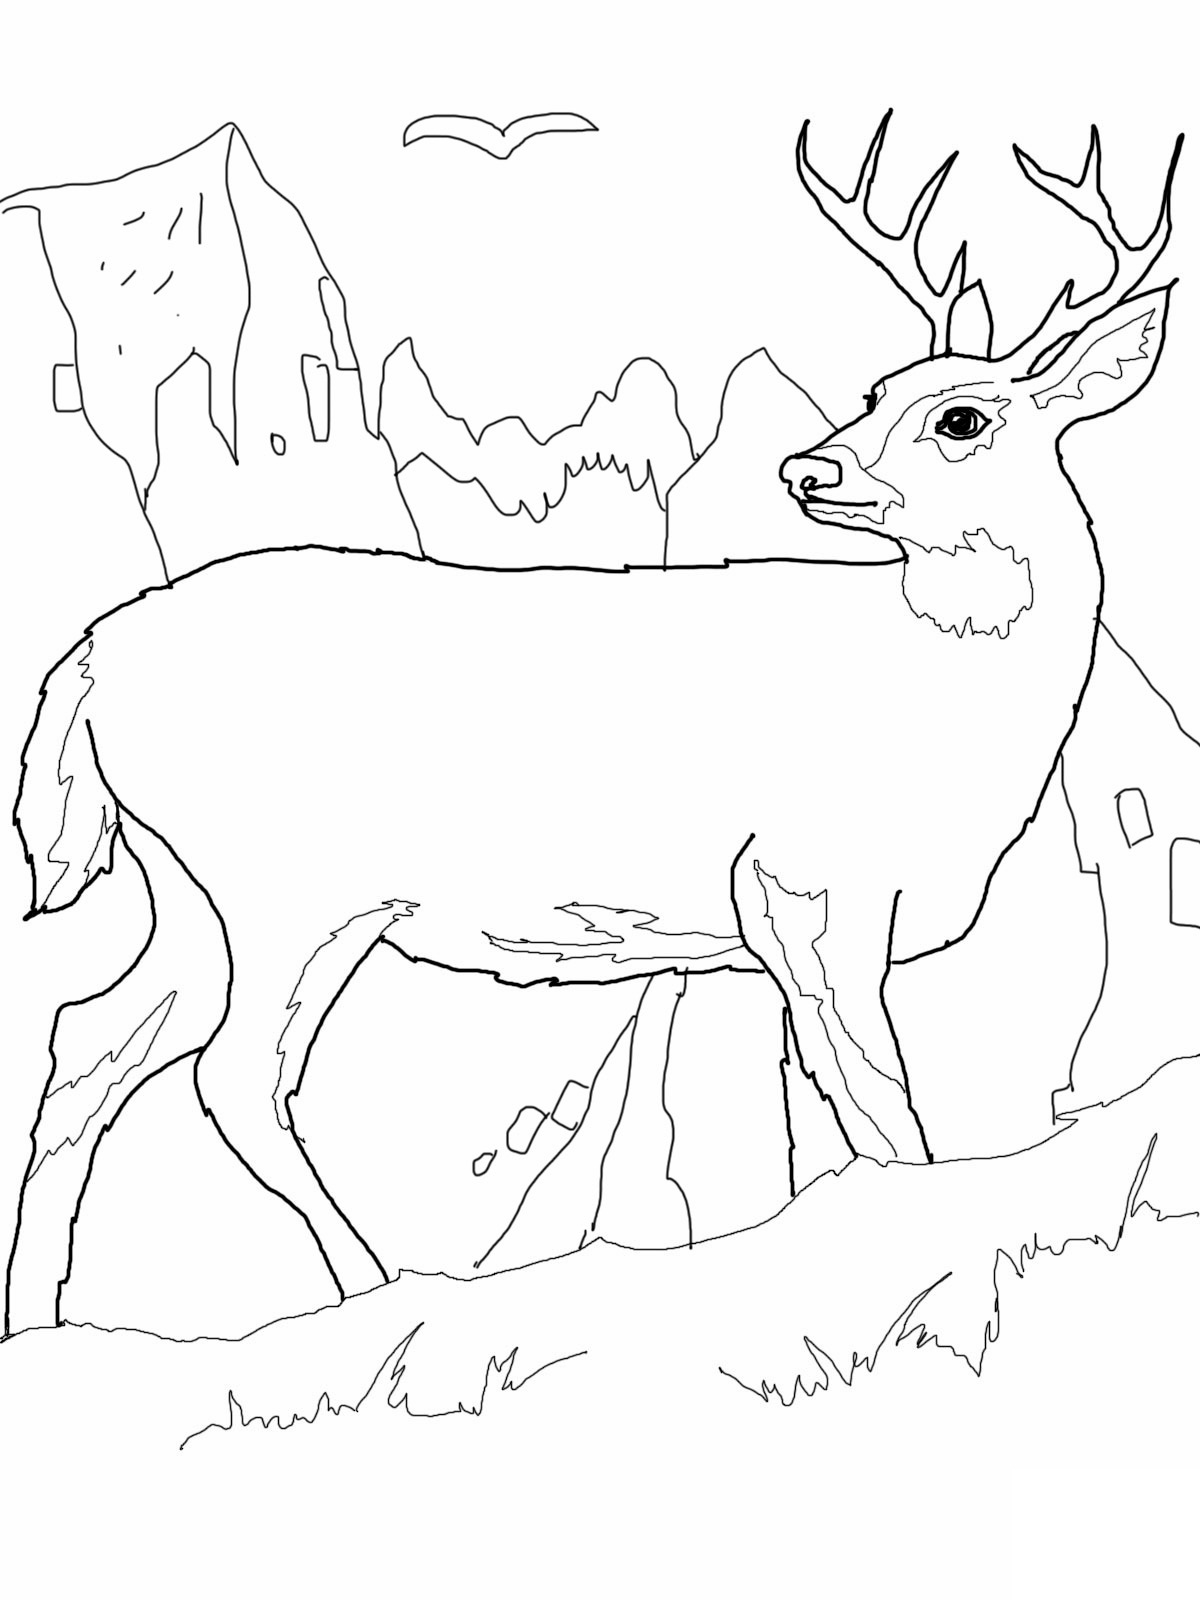 browning buck and doe coloring pages